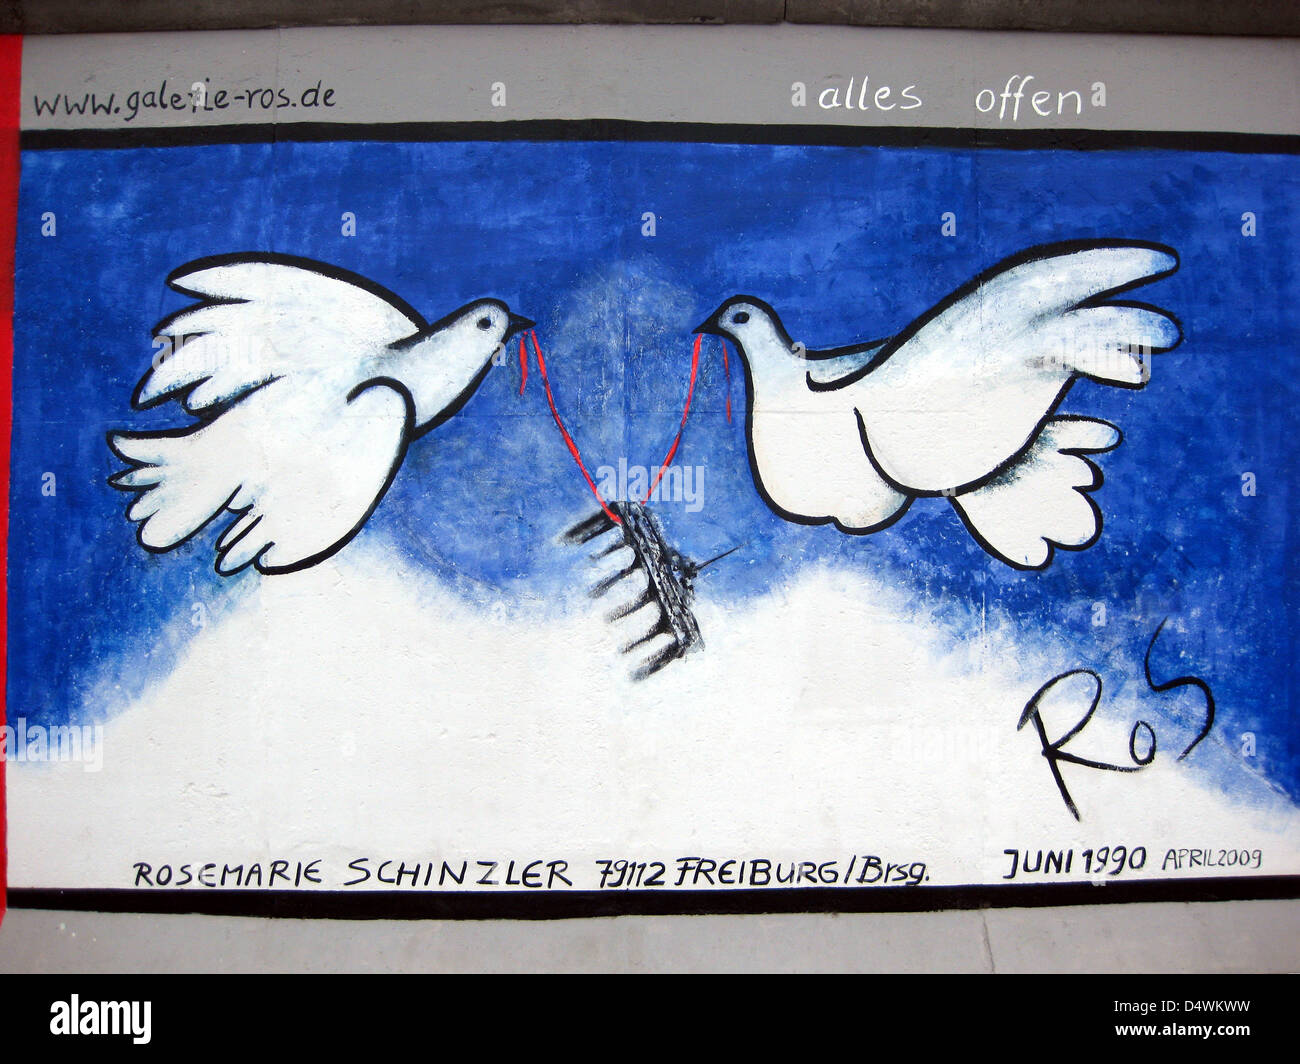 The artwork by Rosemarie Schinzler, 'Alles Offen' (Everything is open), is pictured on a section of the Berlin Wall at the East Side Gallery on Mühlenstrasse in Berlin, Germany, in August 2009. The concrete parts of the Berlin Wall between Ostbahnhof and Warschauer Strasse were painted by international artists after the opening of the inner-German border in November 1989. Photo: Dieter Palm Stock Photo